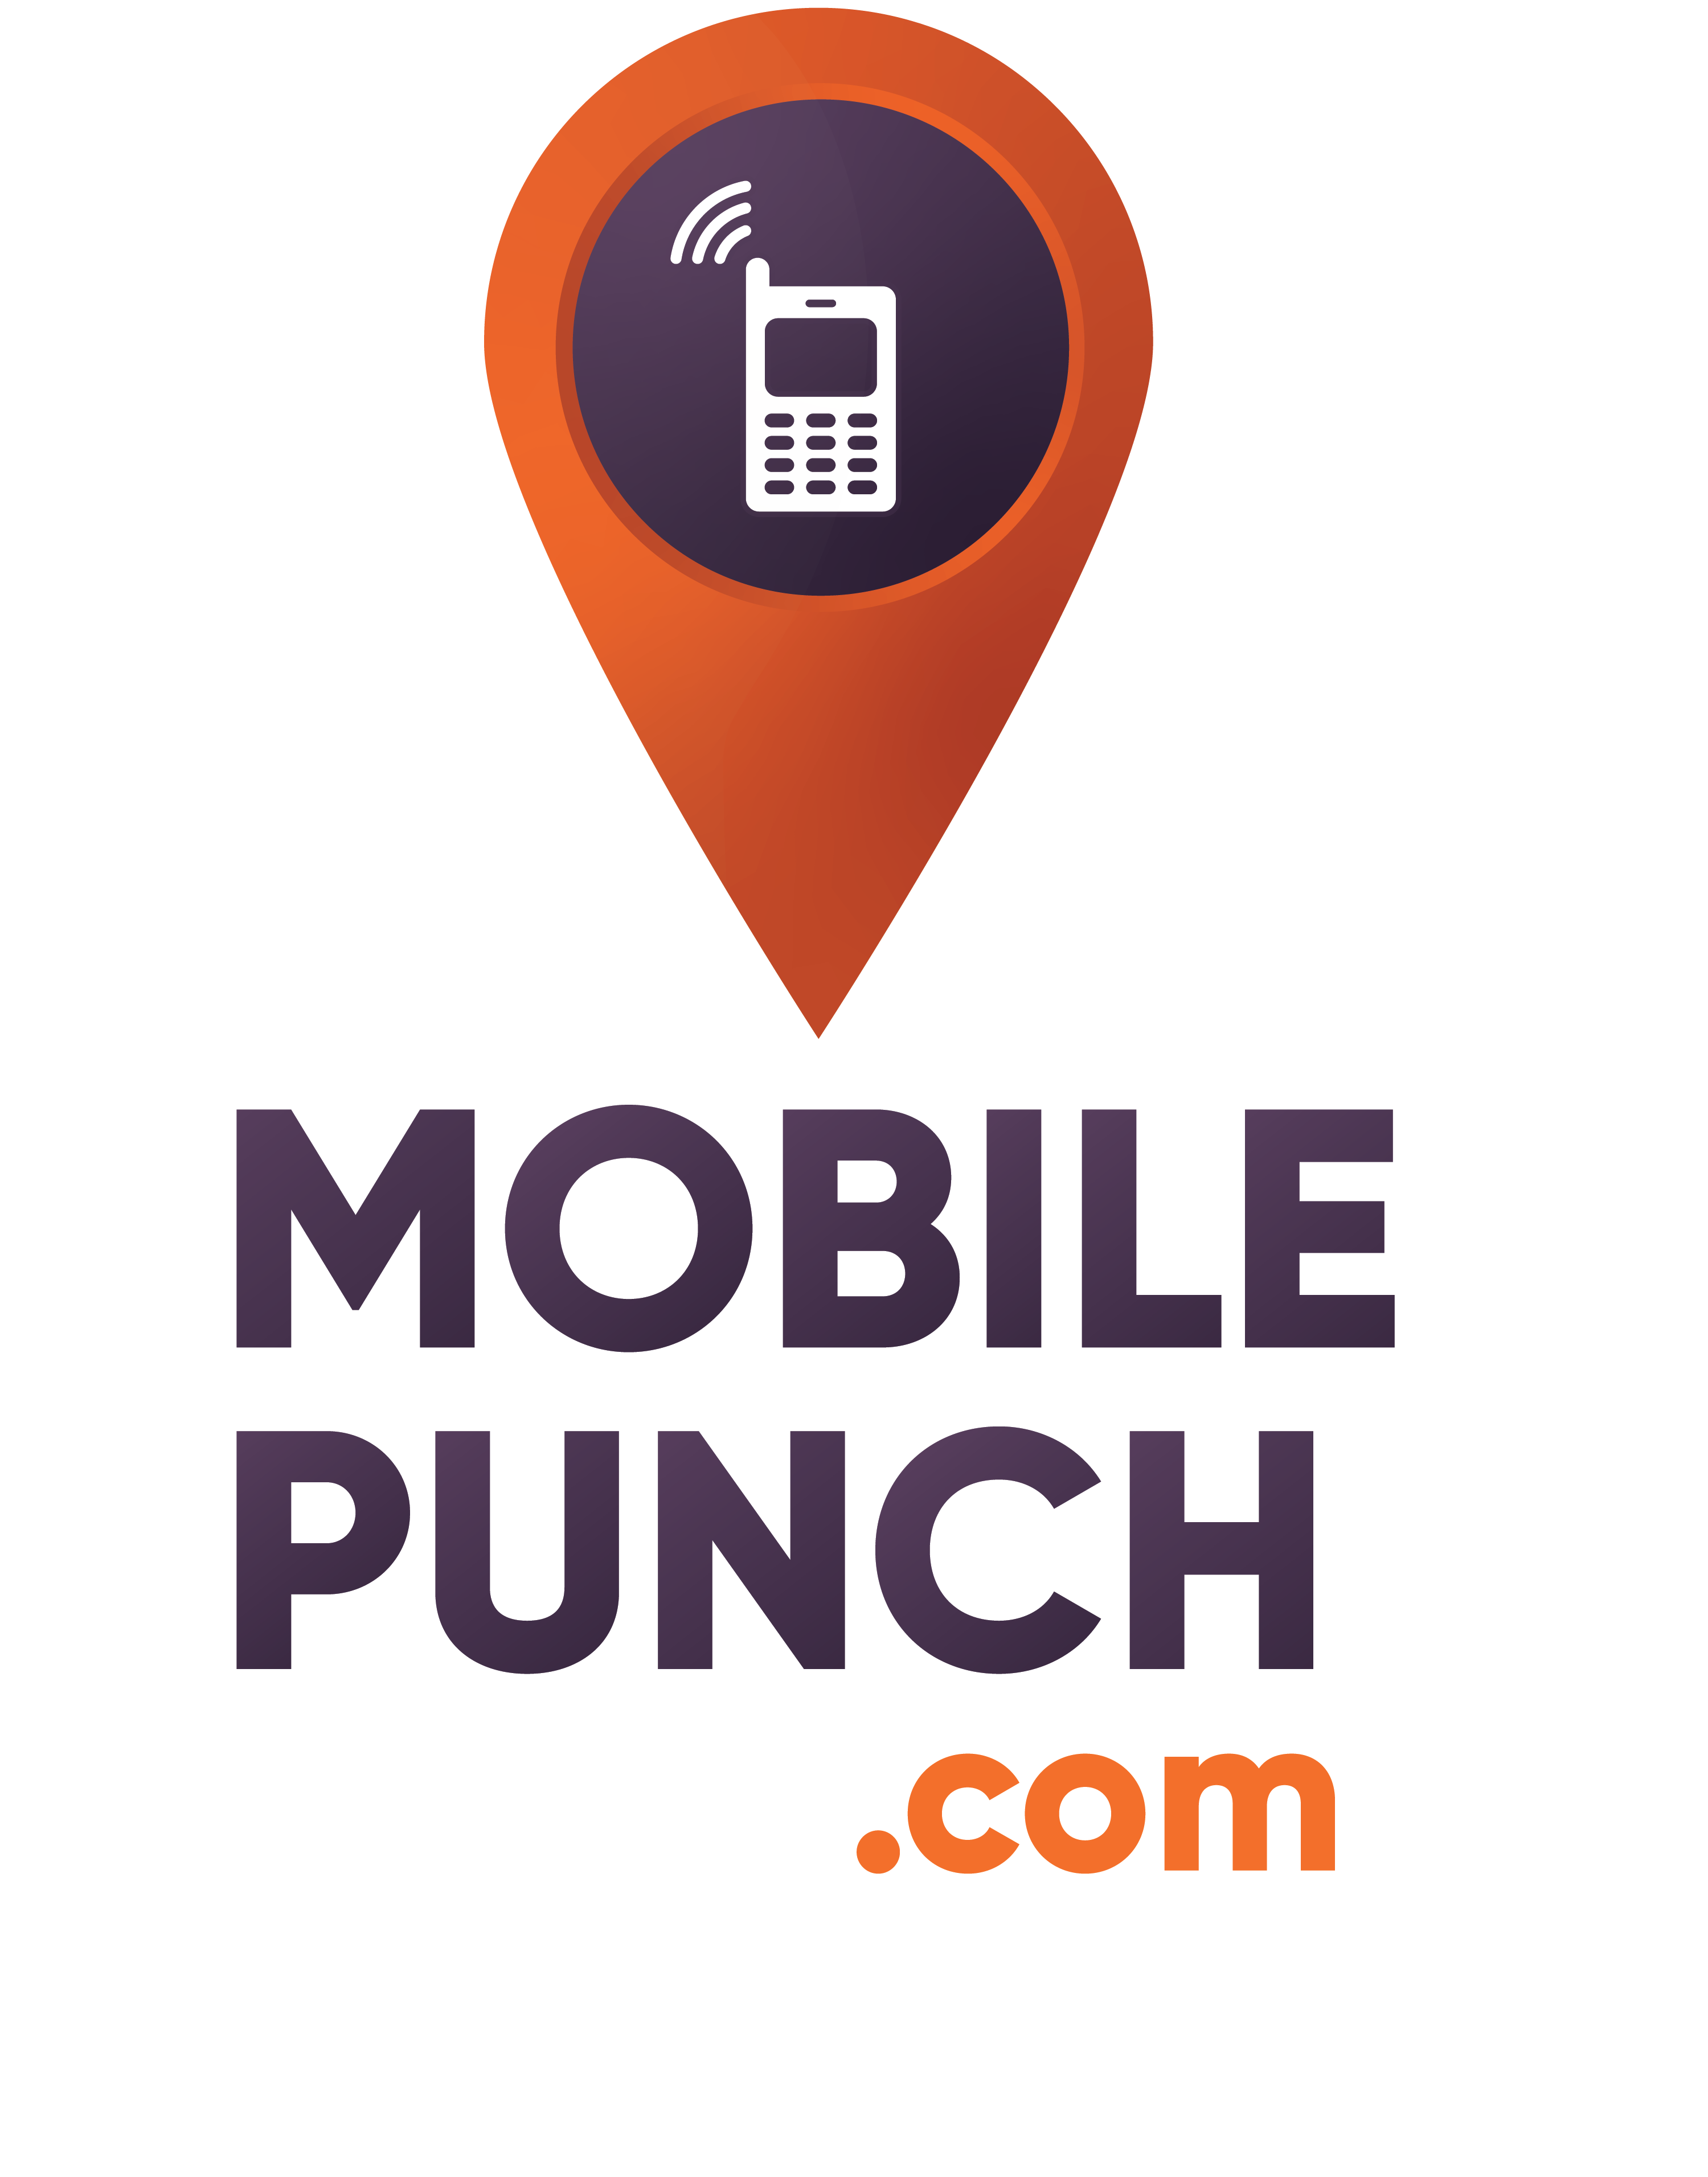 Mobile-Punch, the # 1 application to simplify time management